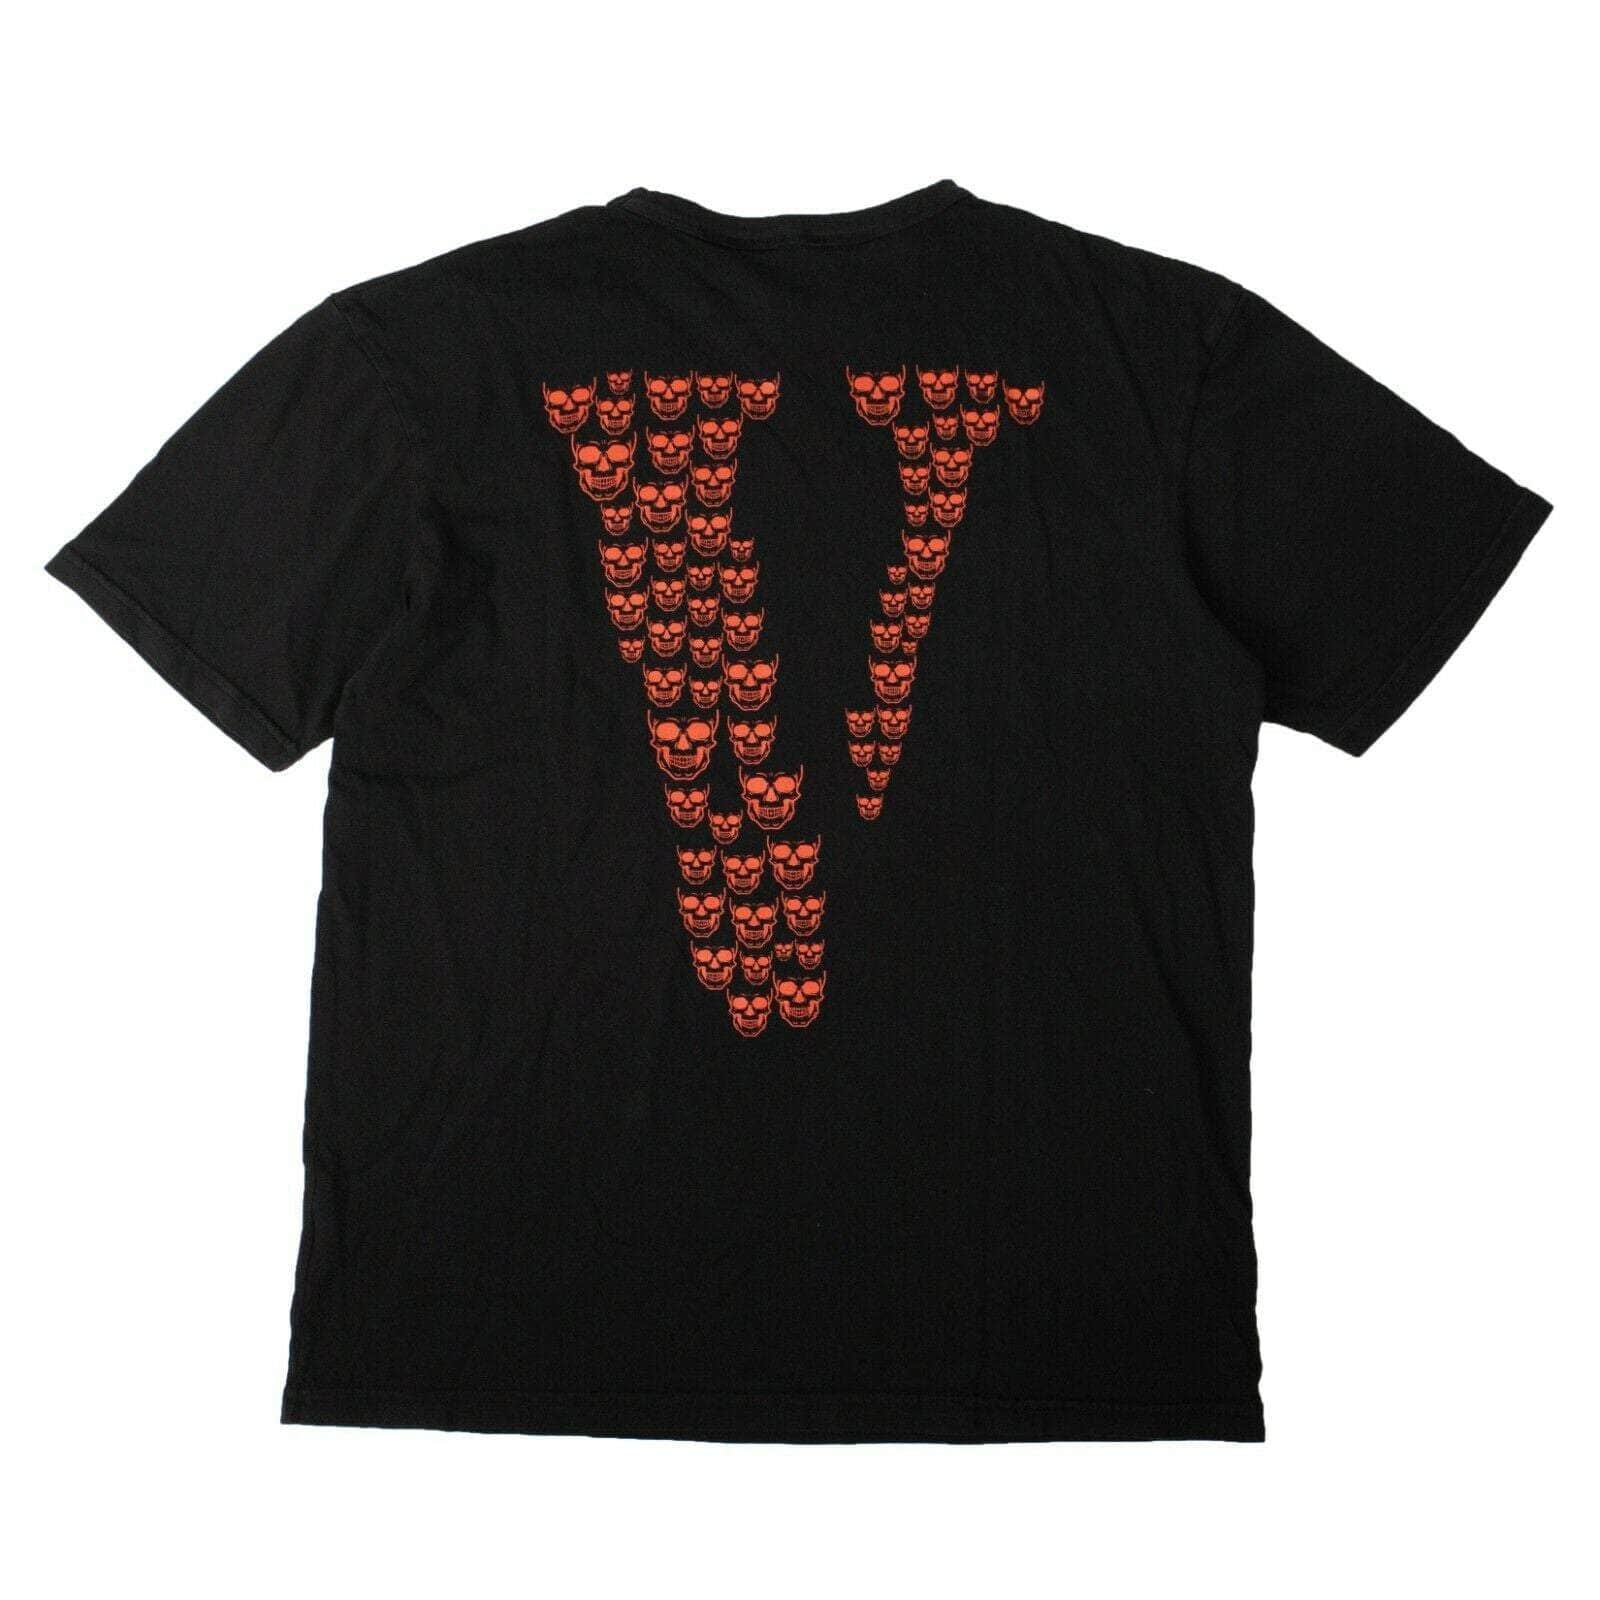 Vlone 250-500, chicmi, couponcollection, gender-mens, main-clothing, mens-shoes, size-s, vlone S Men's Black Cotton Red Skull T-Shirt 83-VLN-1005/S